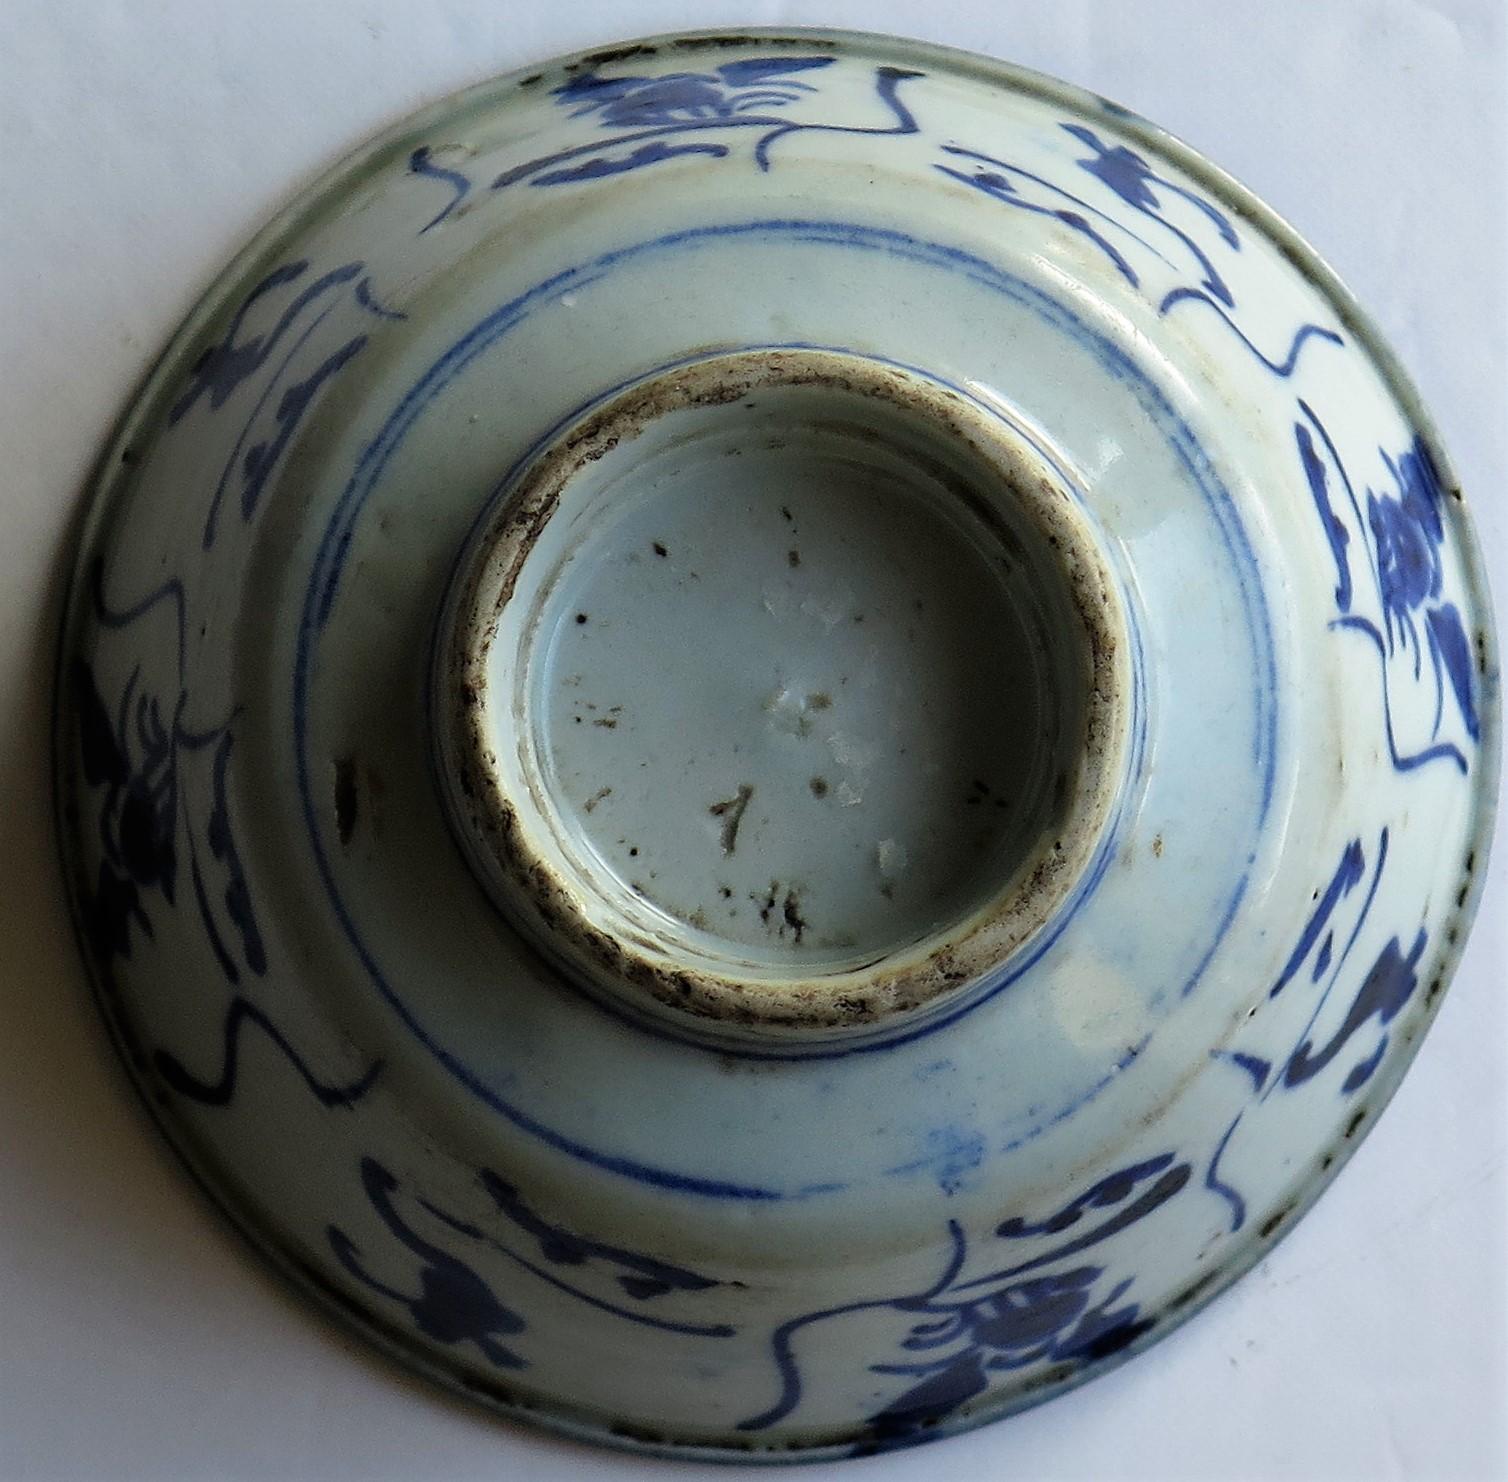 Chinese Porcelain Bowl Hand Painted Blue and White, 17th Century Ming Export For Sale 9